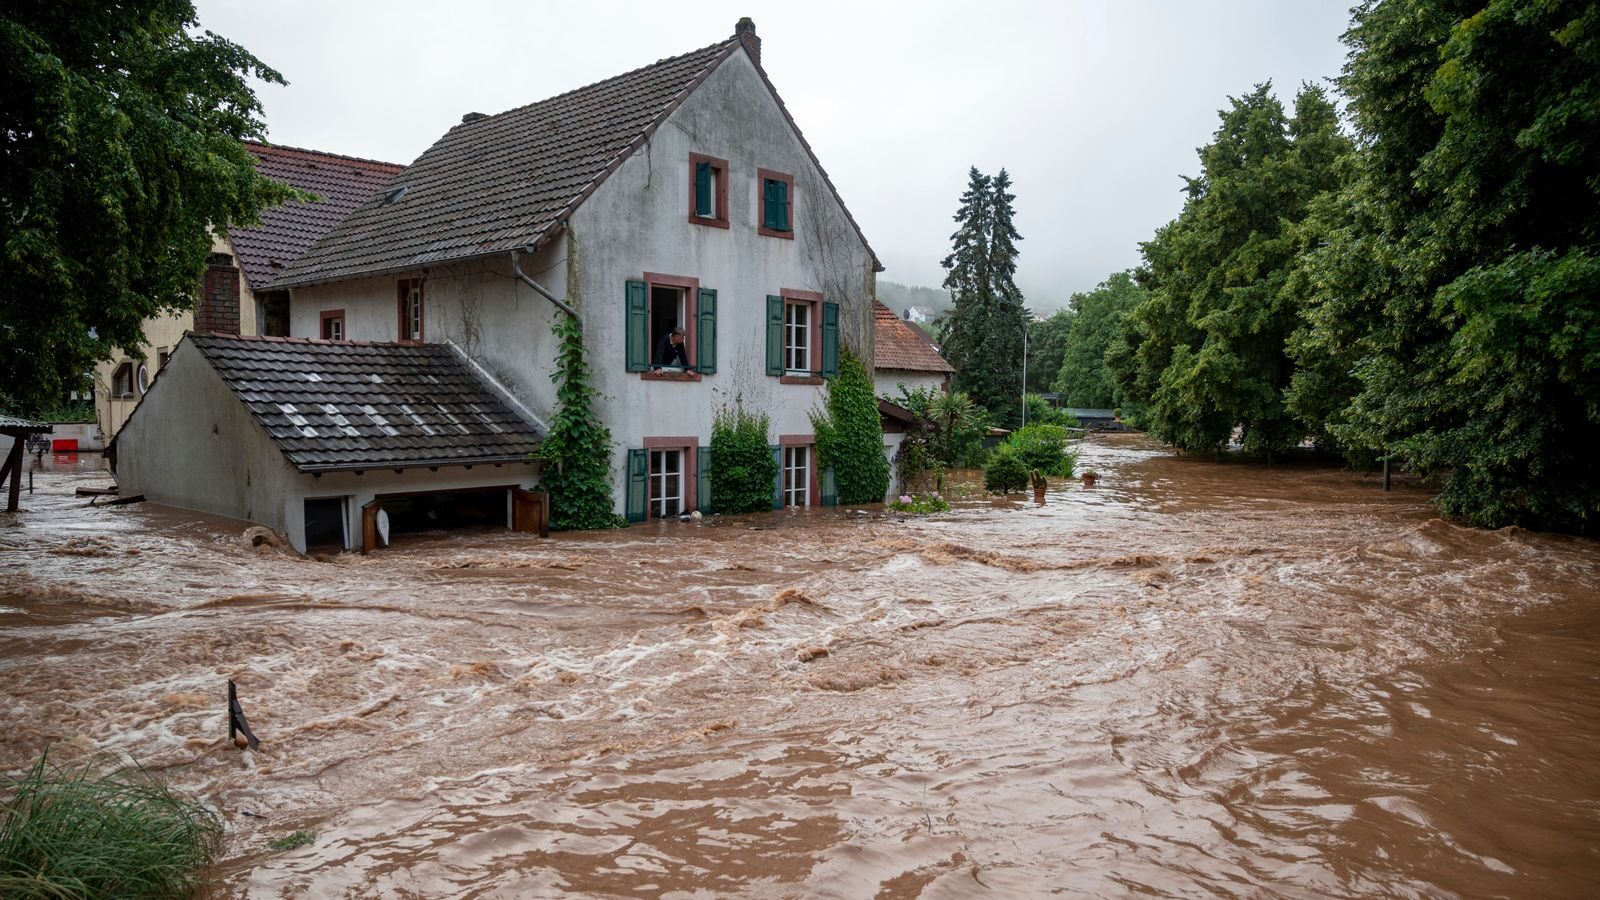 The Kyll river has overflowed its banks in Erdorf and flooded parts of the village